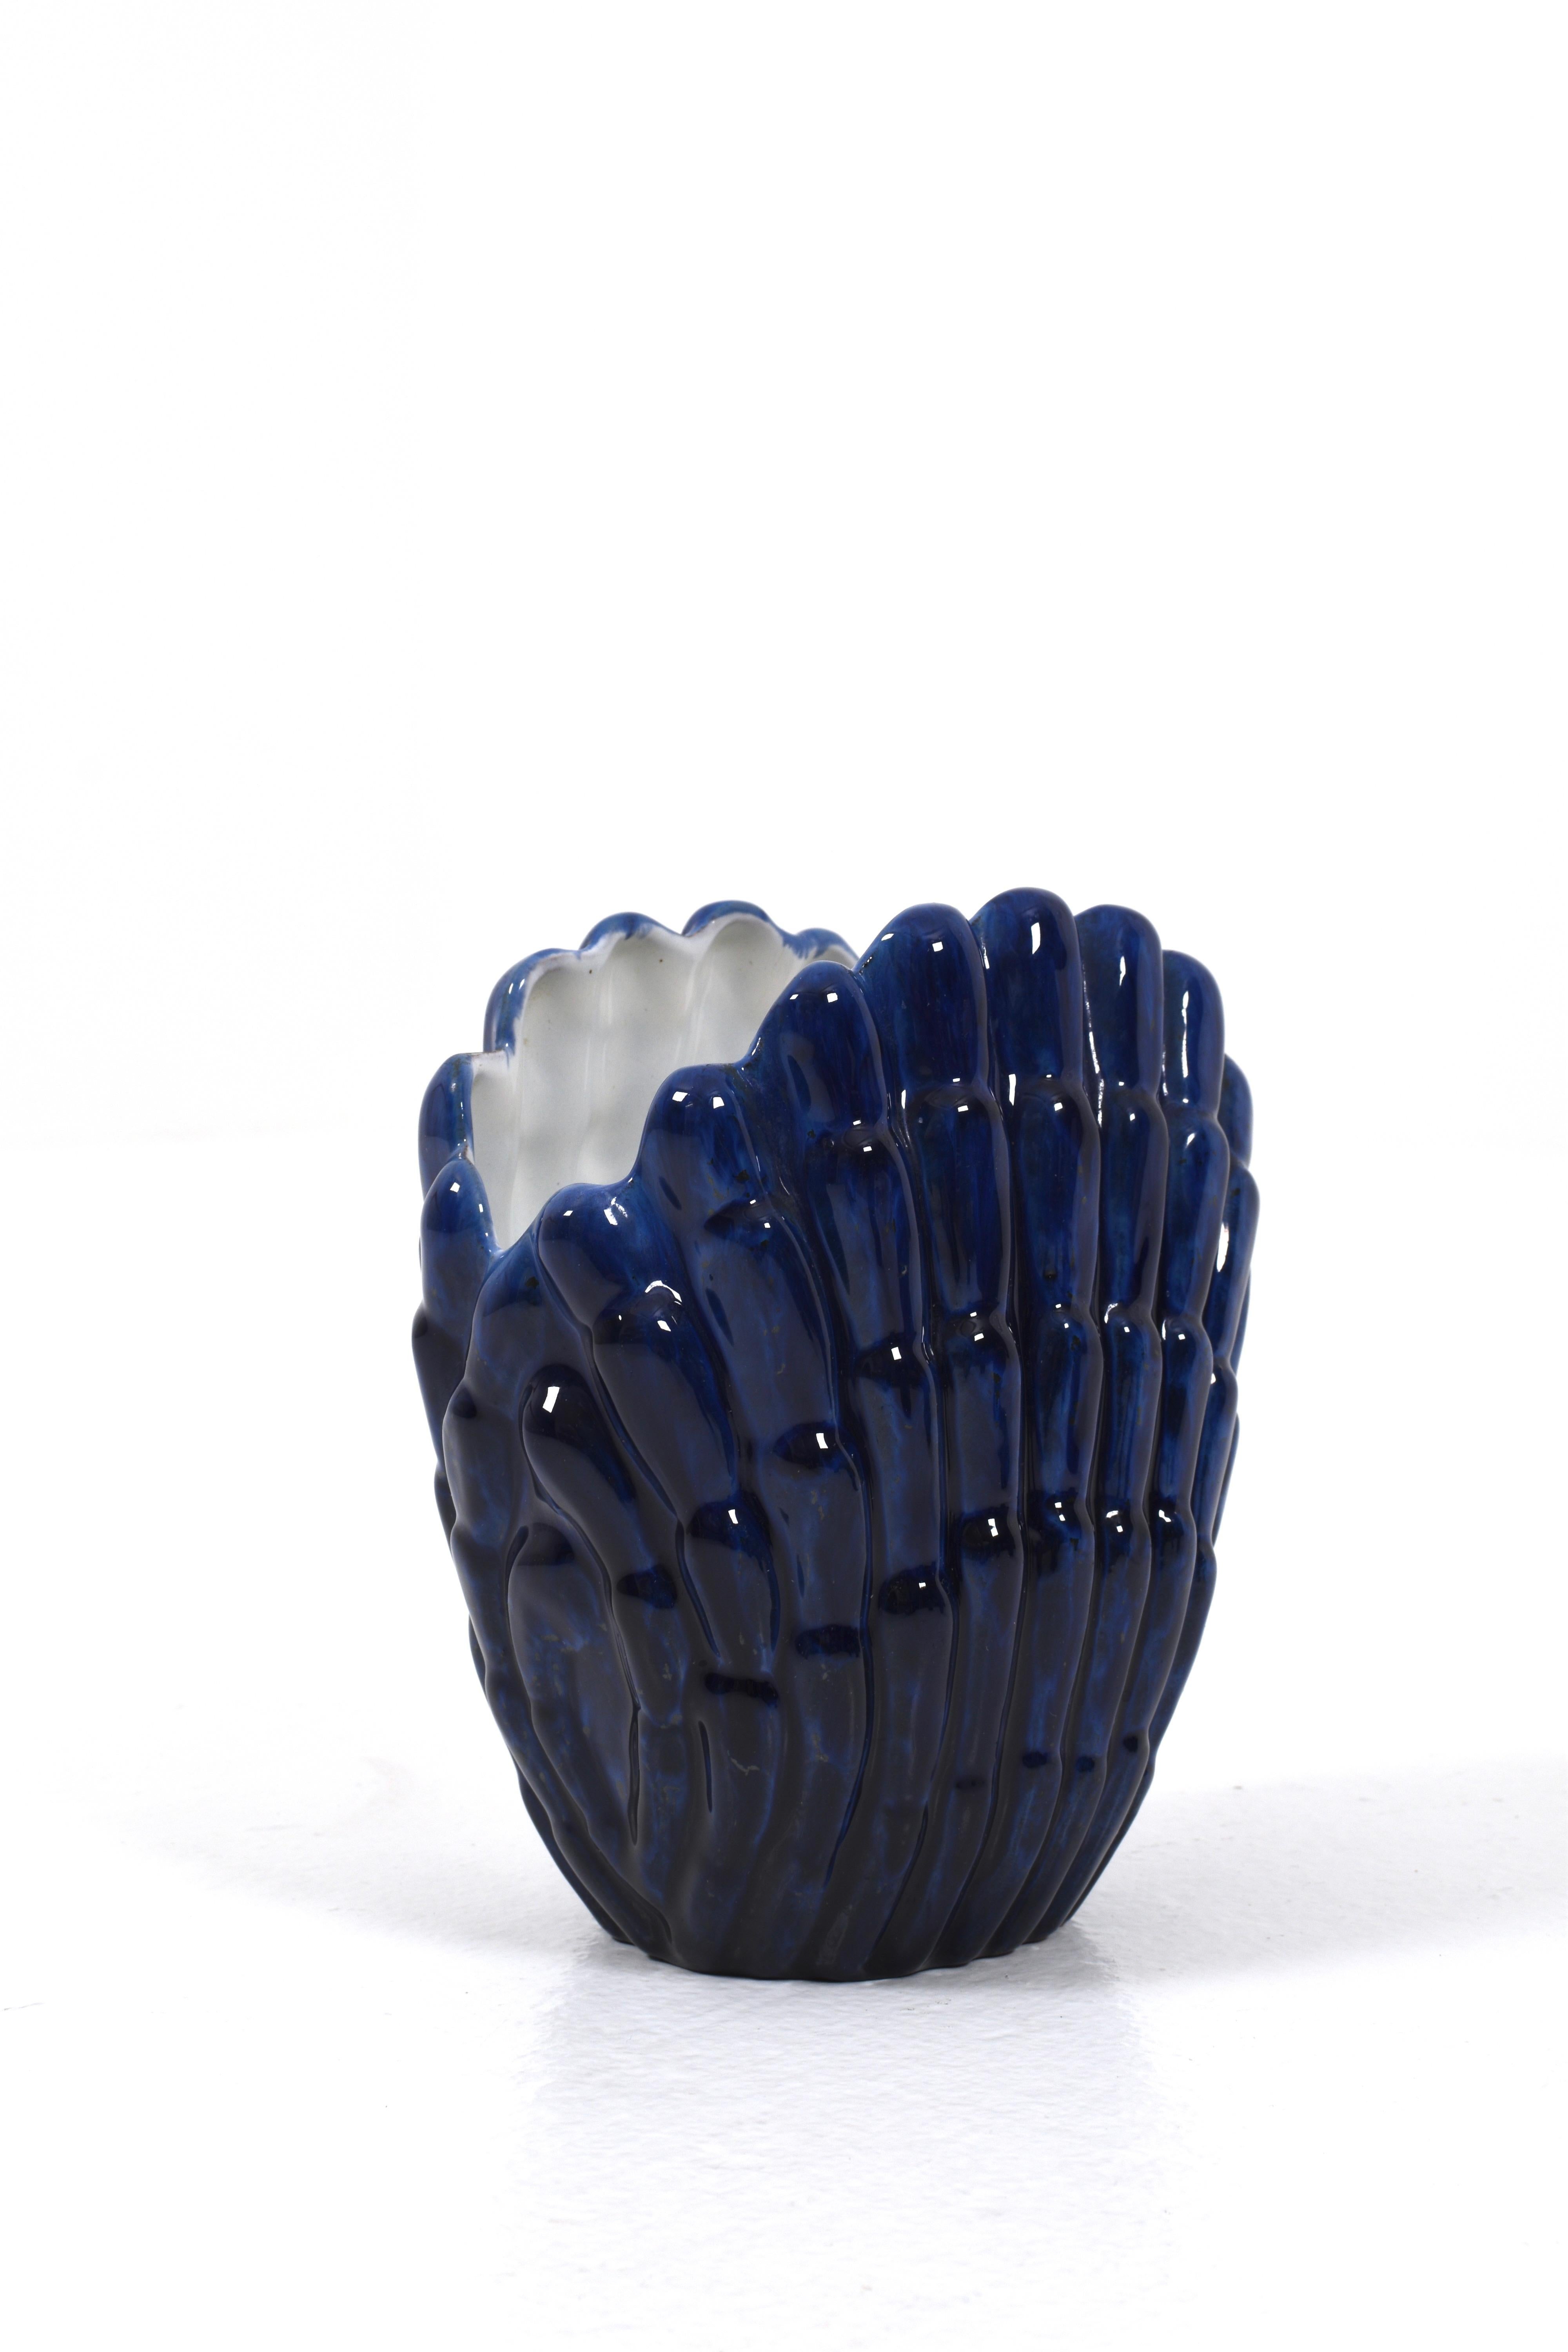 The shell vase is an impressive interior detail that can be used to create a focal point in the room. You can place it alone on a side table, shelf or windowsill, or use it as a beautiful base to display flowers or greenery. No matter how you choose